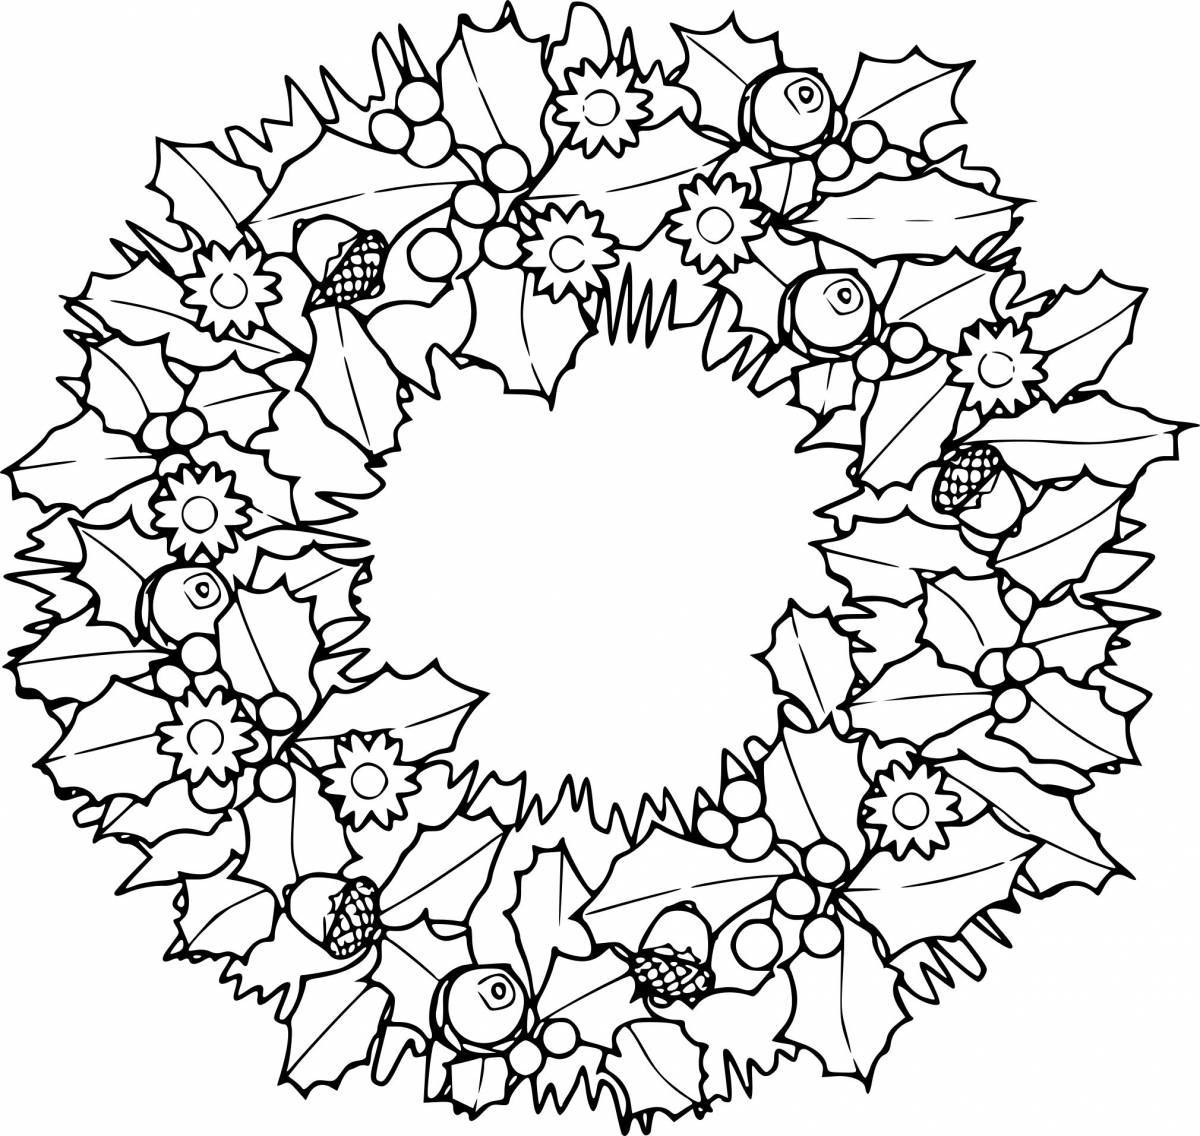 Sweet Christmas wreath coloring page